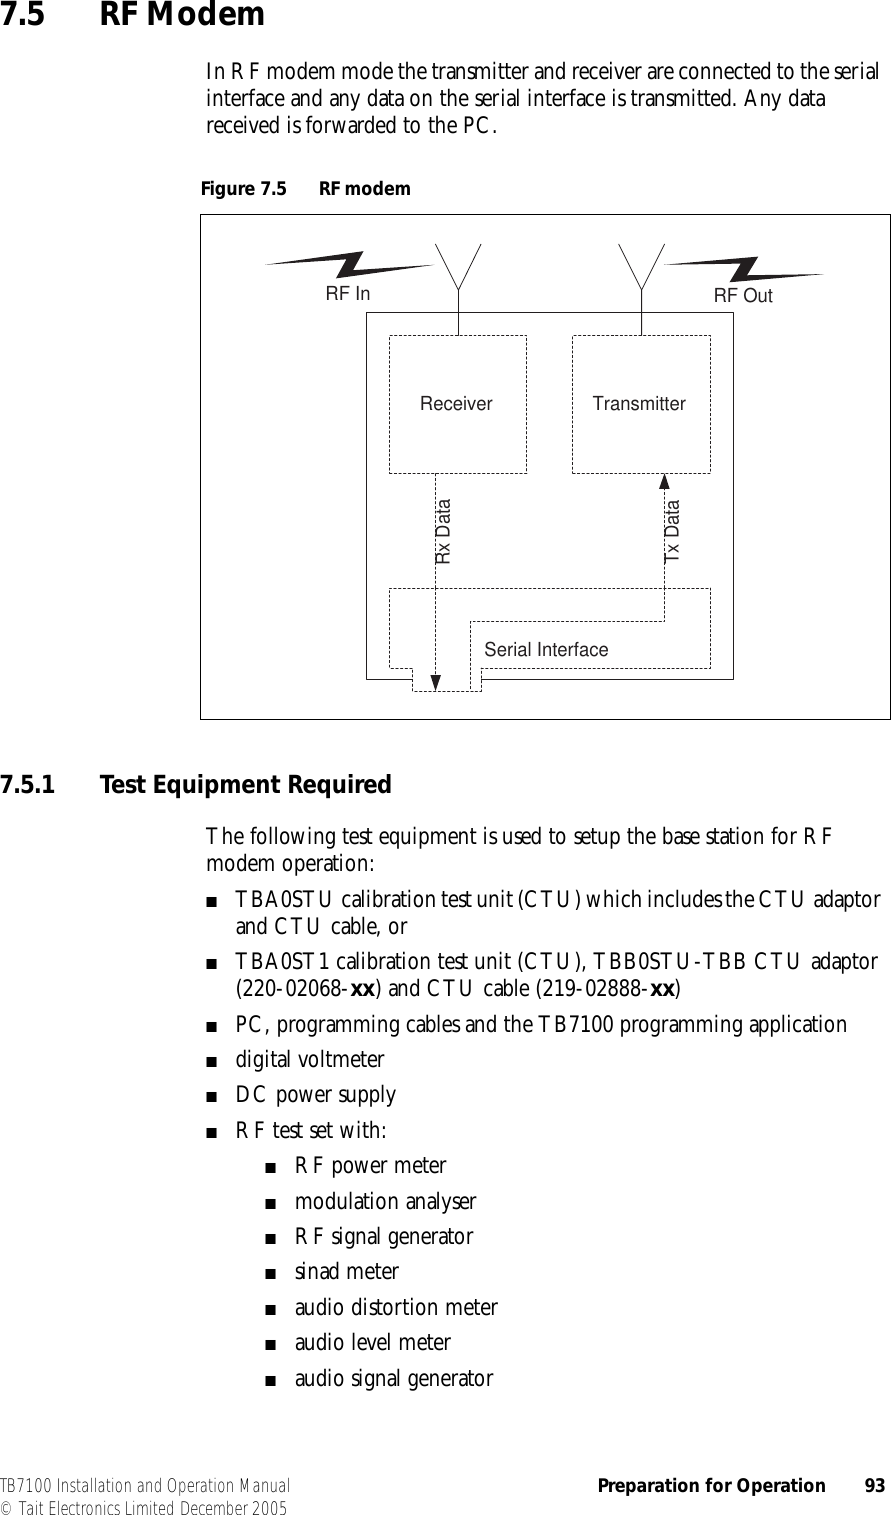  TB7100 Installation and Operation Manual Preparation for Operation 93© Tait Electronics Limited December 20057.5 RF ModemIn RF modem mode the transmitter and receiver are connected to the serial interface and any data on the serial interface is transmitted. Any data received is forwarded to the PC.7.5.1 Test Equipment RequiredThe following test equipment is used to setup the base station for RF modem operation: ■TBA0STU calibration test unit (CTU) which includes the CTU adaptor and CTU cable, or■TBA0ST1 calibration test unit (CTU), TBB0STU-TBB CTU adaptor (220-02068-xx) and CTU cable (219-02888-xx)■PC, programming cables and the TB7100 programming application■digital voltmeter■DC power supply■RF test set with:■RF power meter■modulation analyser■RF signal generator■sinad meter■audio distortion meter■audio level meter■audio signal generatorFigure 7.5 RF modemSerial InterfaceReceiver TransmitterRF In RF OutRx DataTx Data